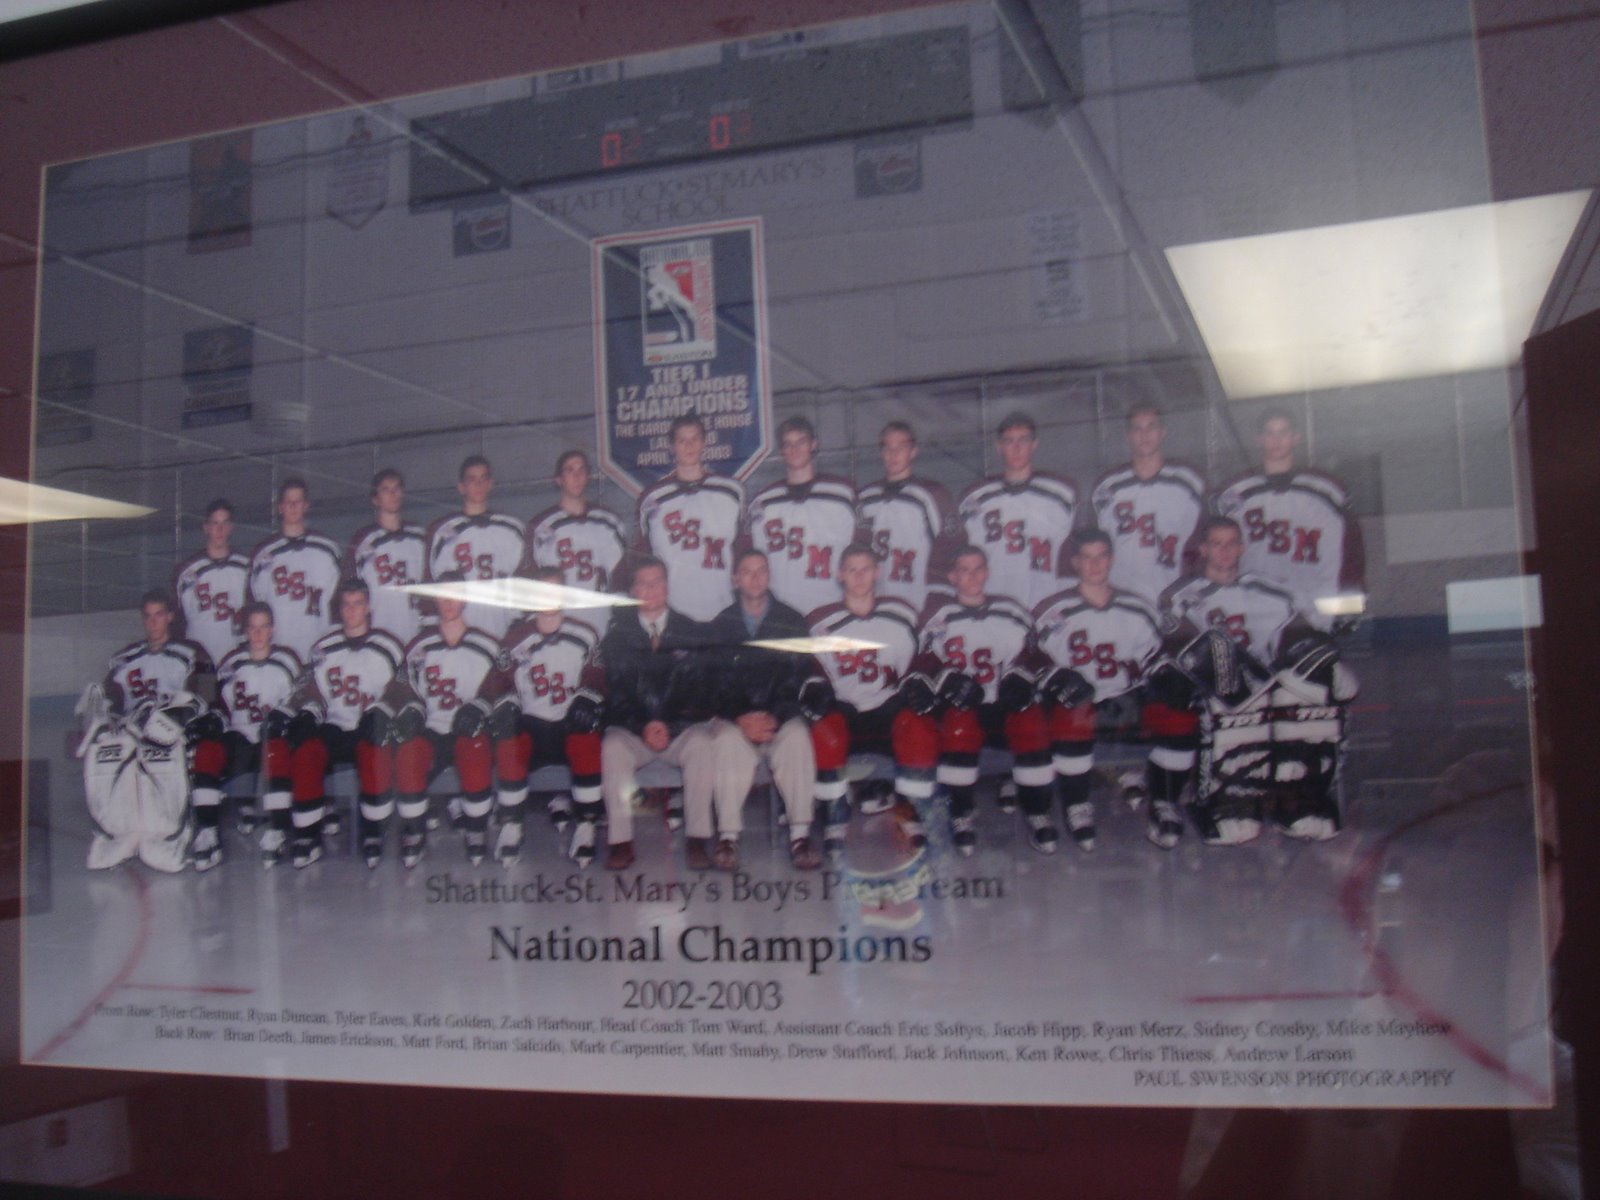 [Shattuck-St.+Mary's+Boys+National+Champs+team+picture+2002-03.JPG]